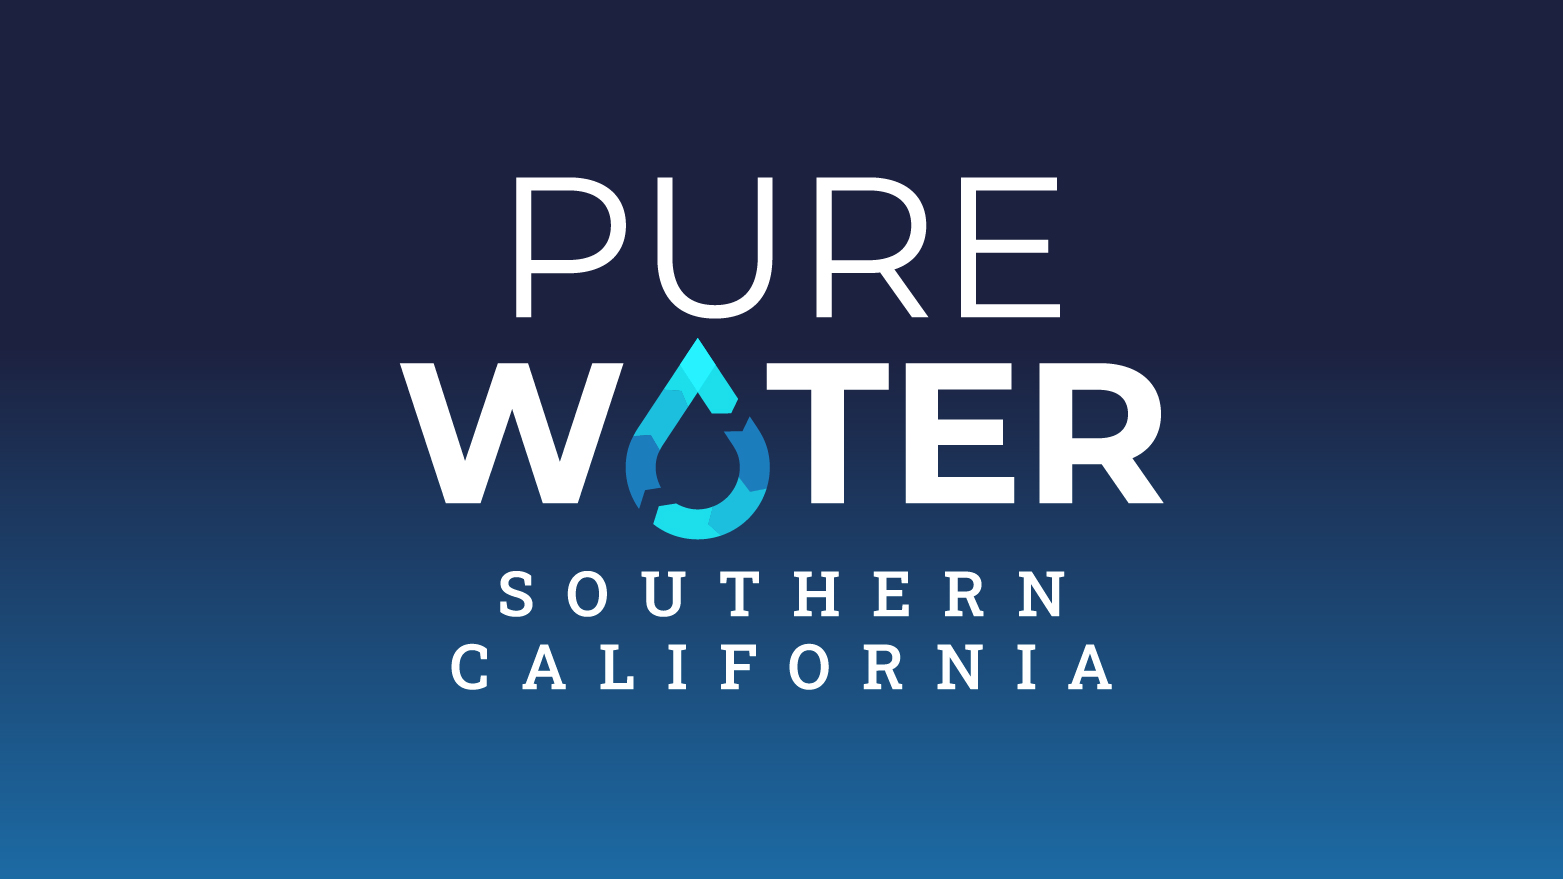 COMMUNITY SURVEY FOR PURE WATER SOUTHERN CALIFORNIA